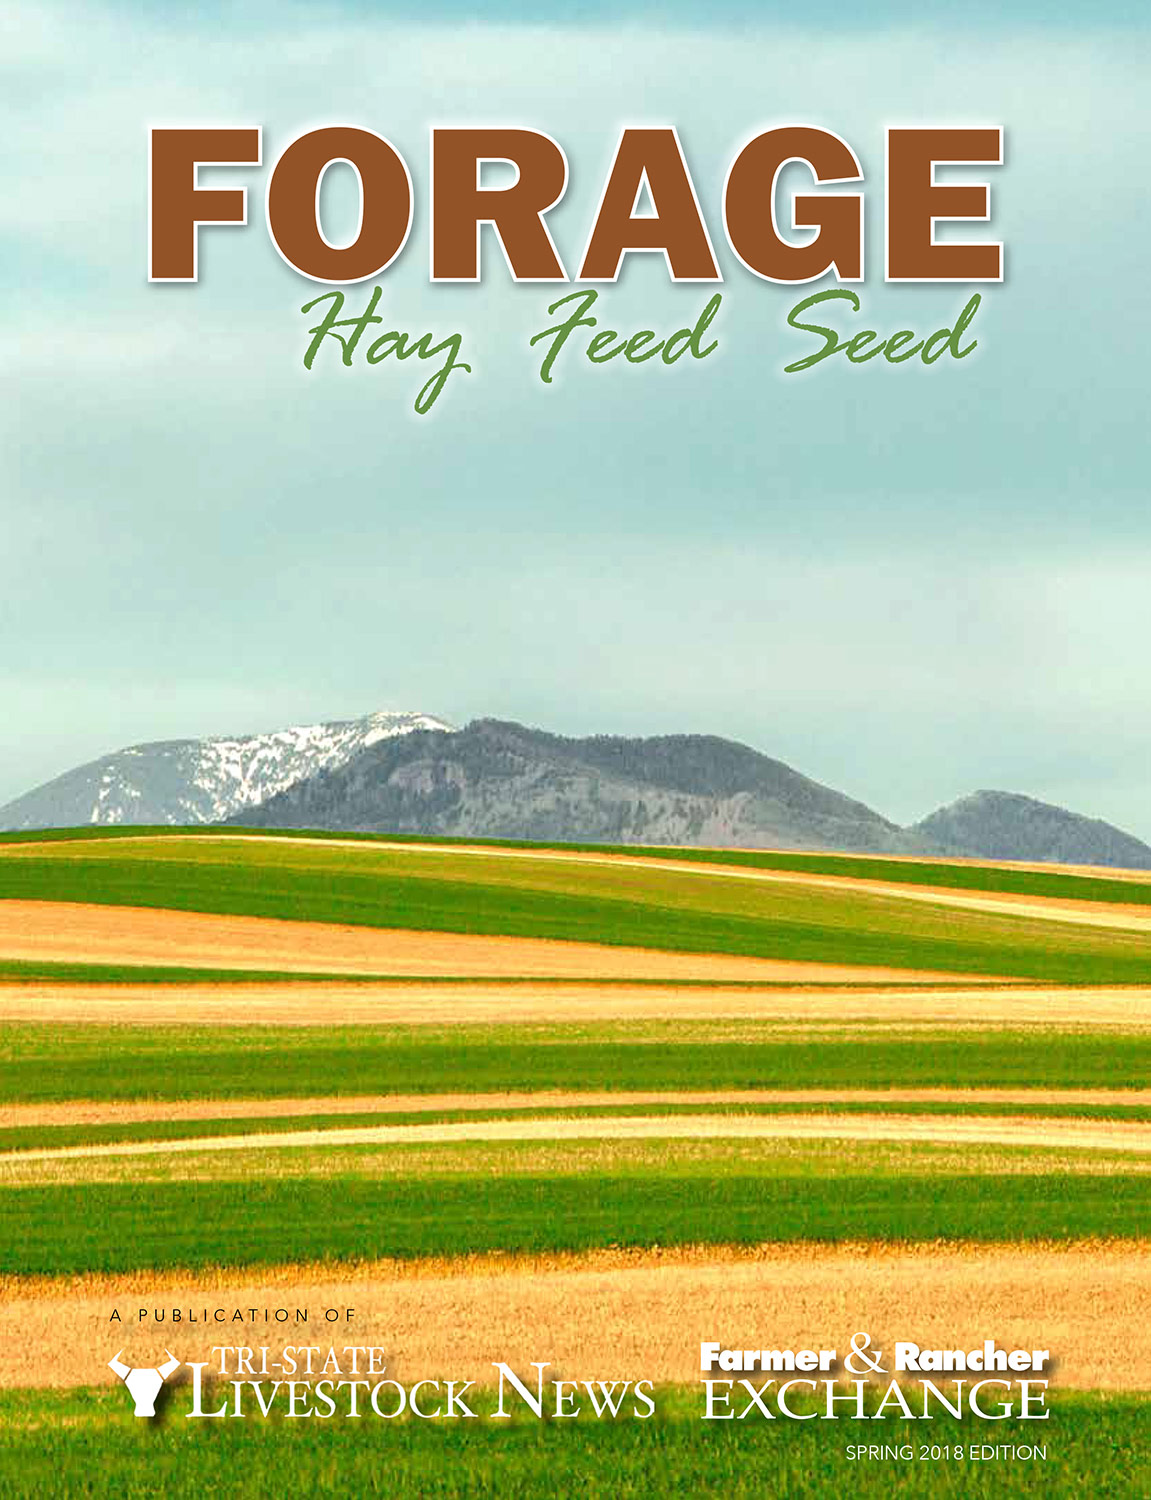 Agricultural Landscape Photo of Strip Crops Appears on Cover of Forage Magazine